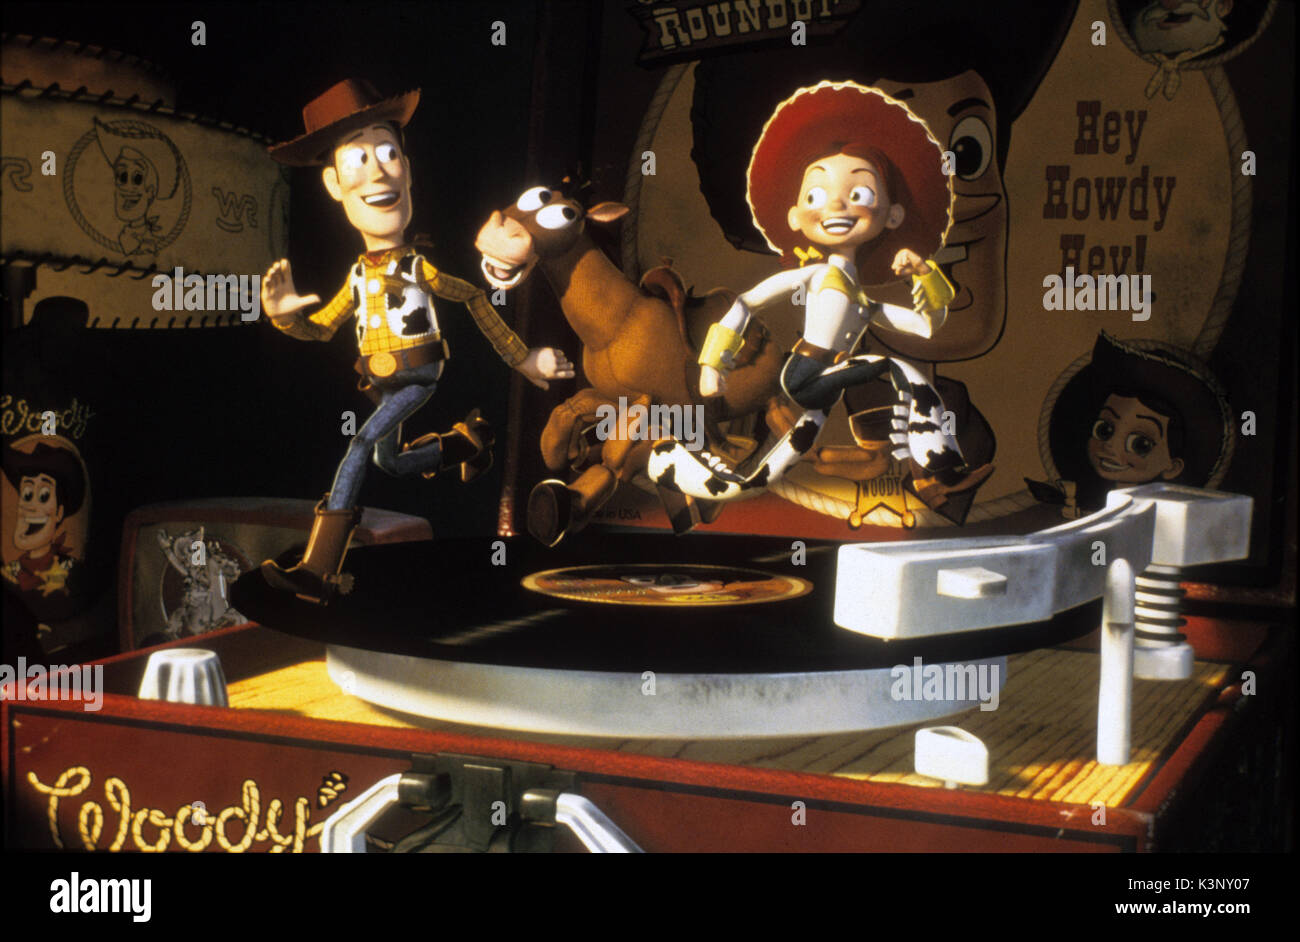 TOY STORY 2 [US 1999] Woody voiced by Tom Hanks, Jessie the Yodelling Cowgirl voiced by Joan Cusack     Date: 1999 Stock Photo